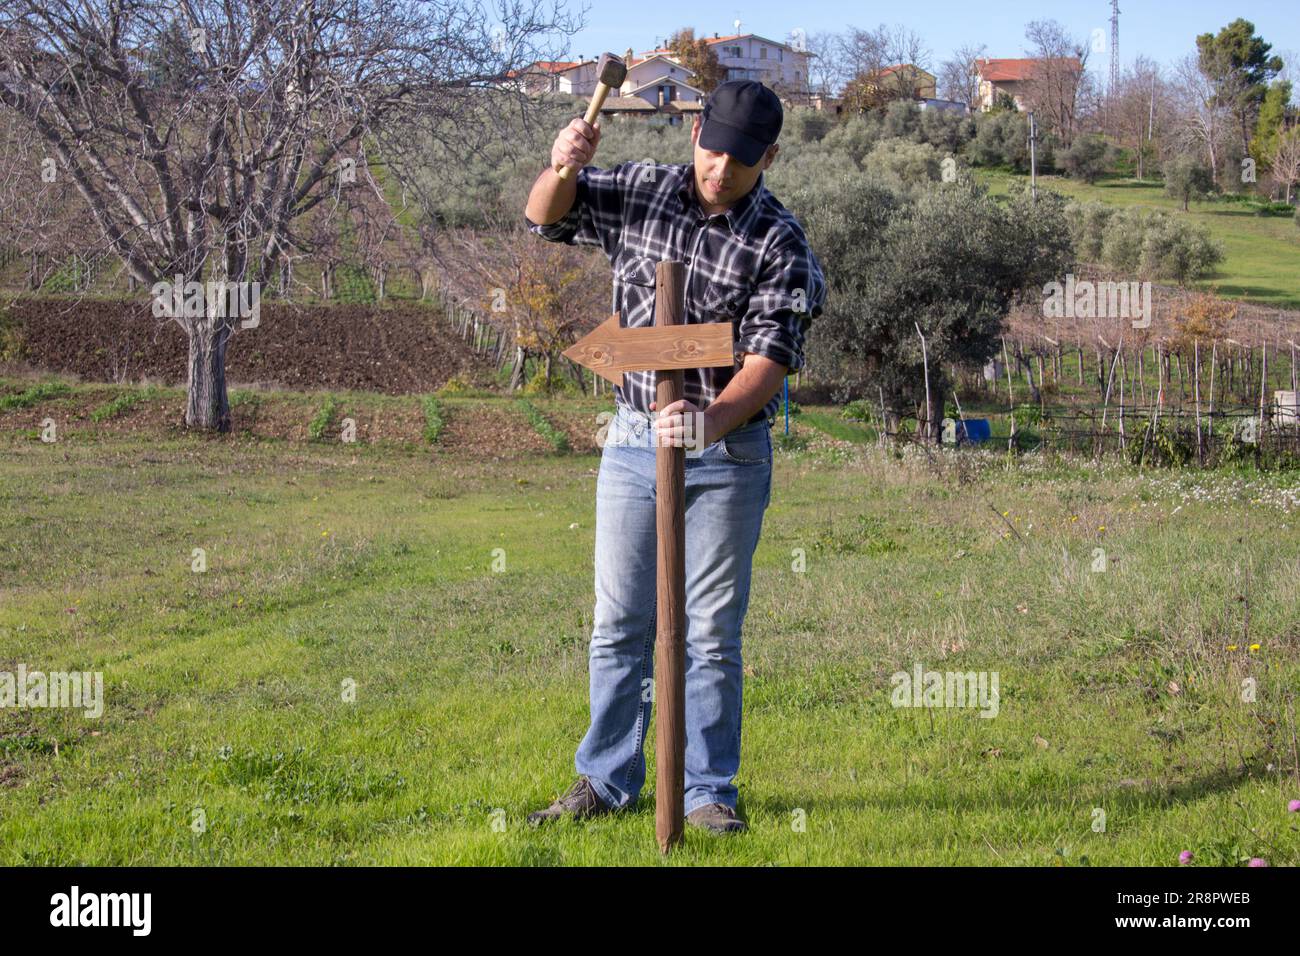 Image of a man driving a stake with an arrow into the ground with a hammer. Pole indicating the direction to take. Stock Photo